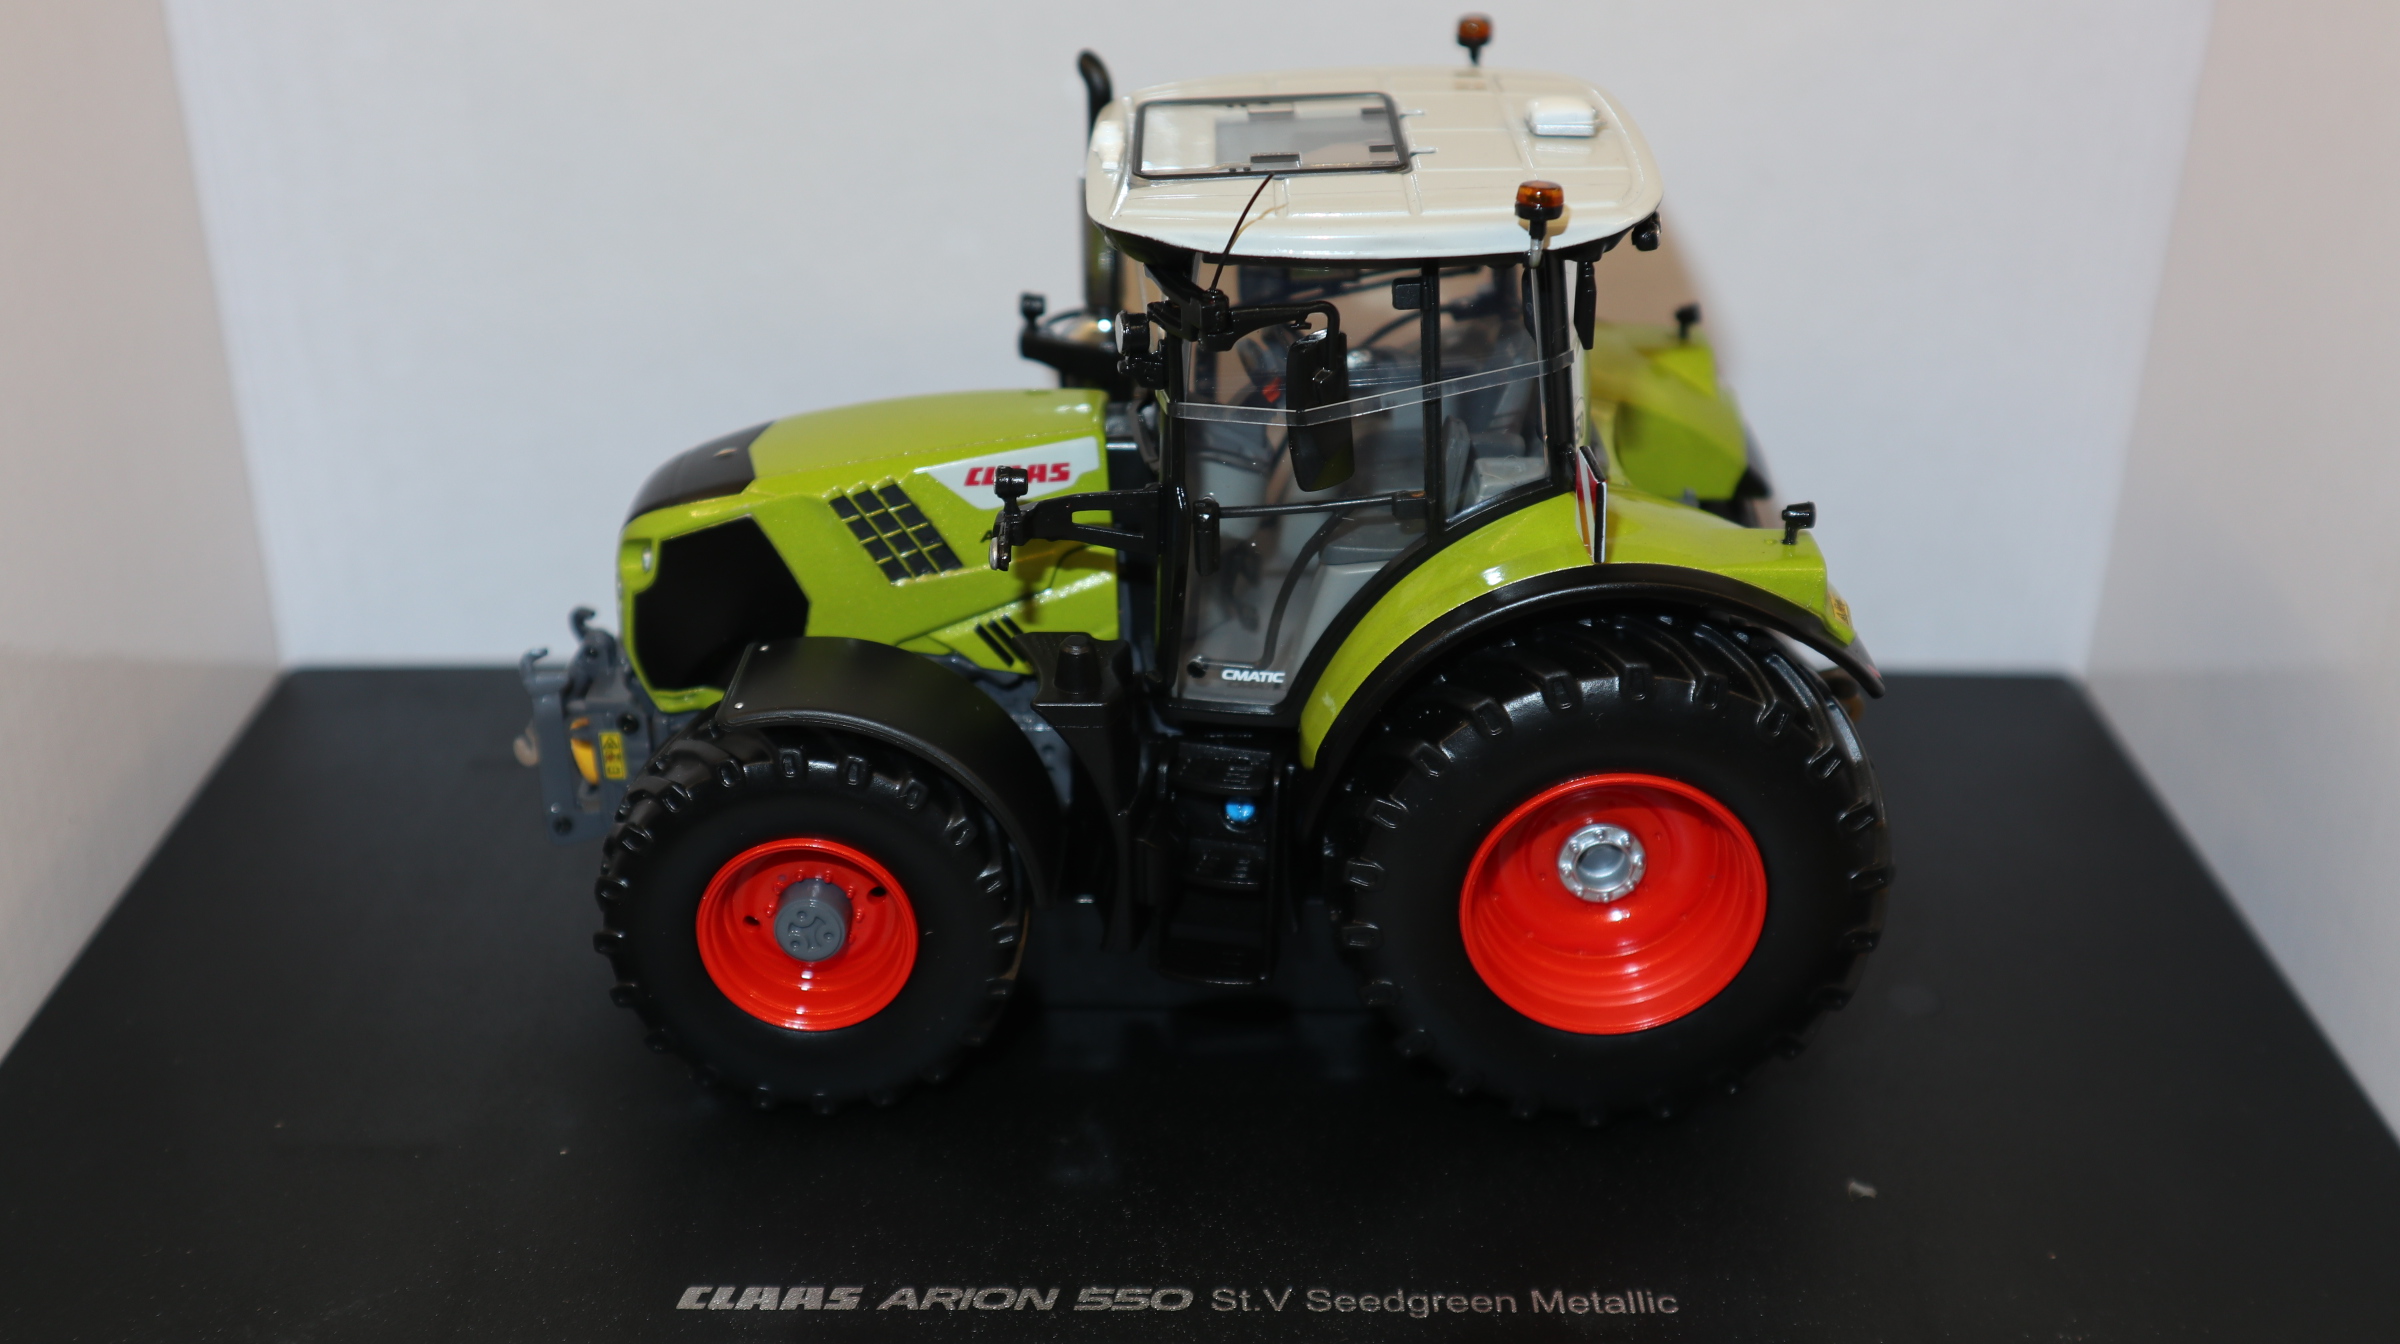 UH in 1:32, CLAAS Arion 550 St.V Seedgreen Metallic  Agritechnica 2023, NEU in OVP